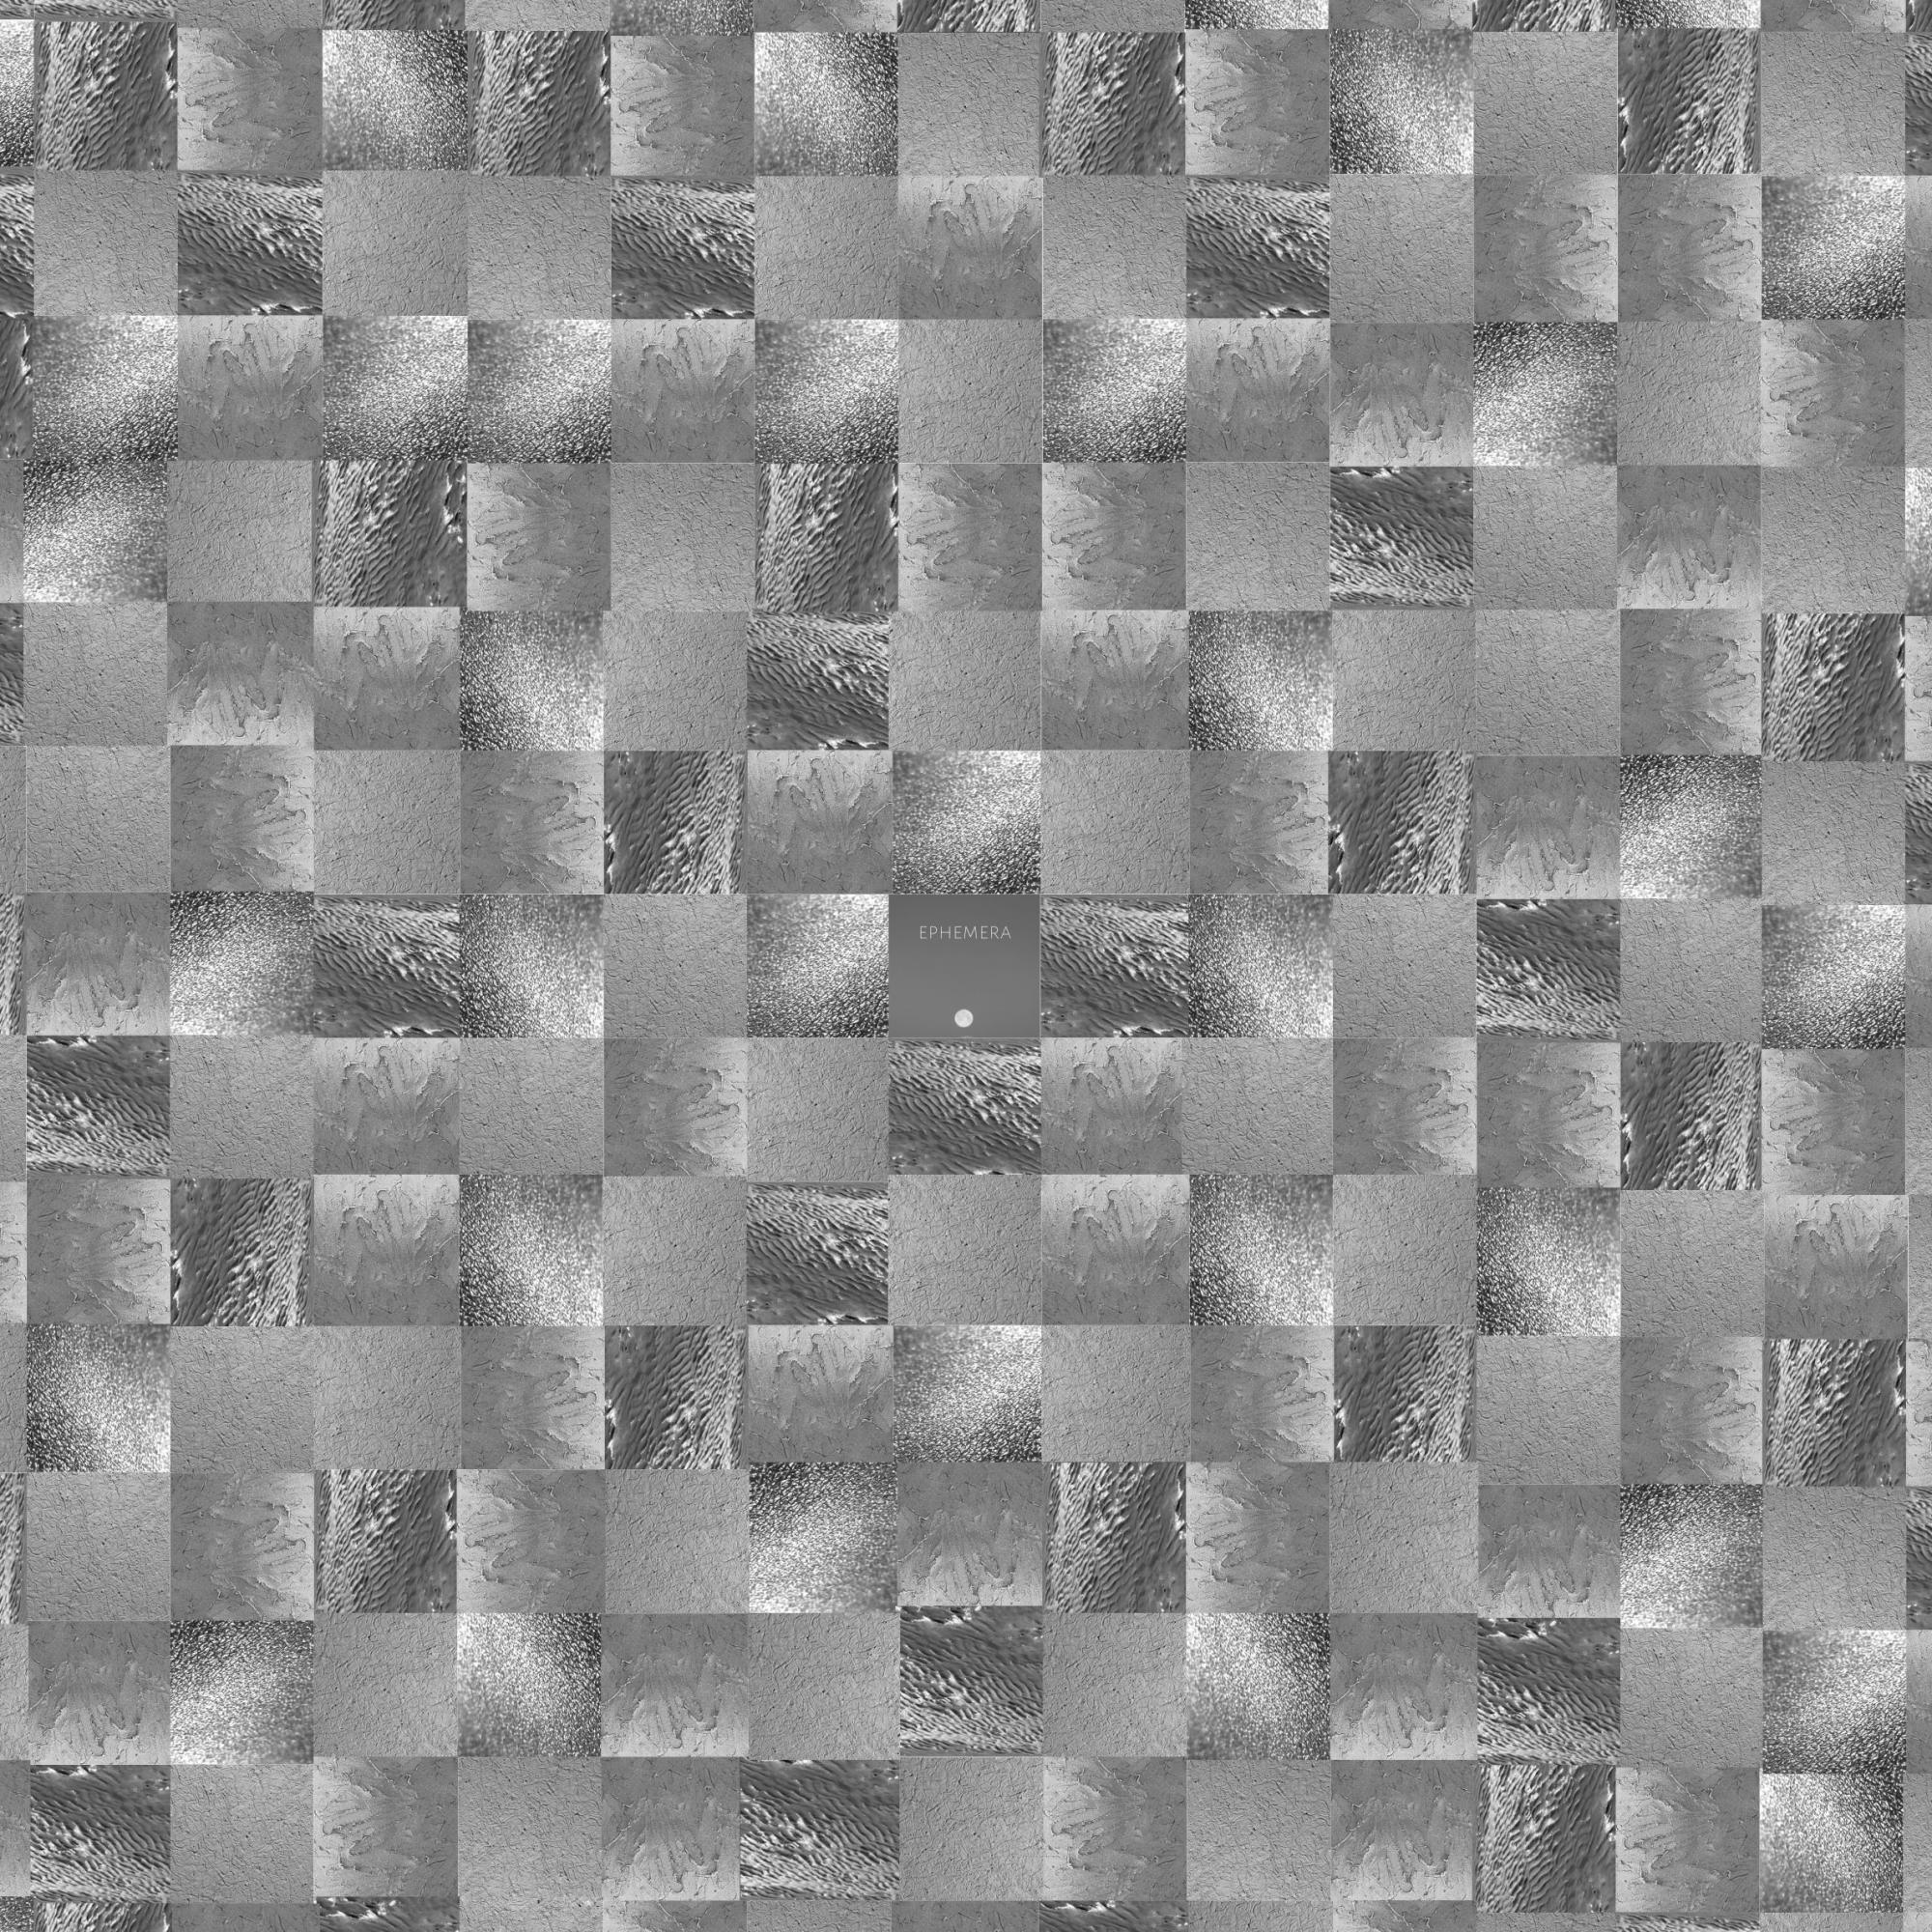 A grid of black and white macro images of either clay, skin, or ceramic